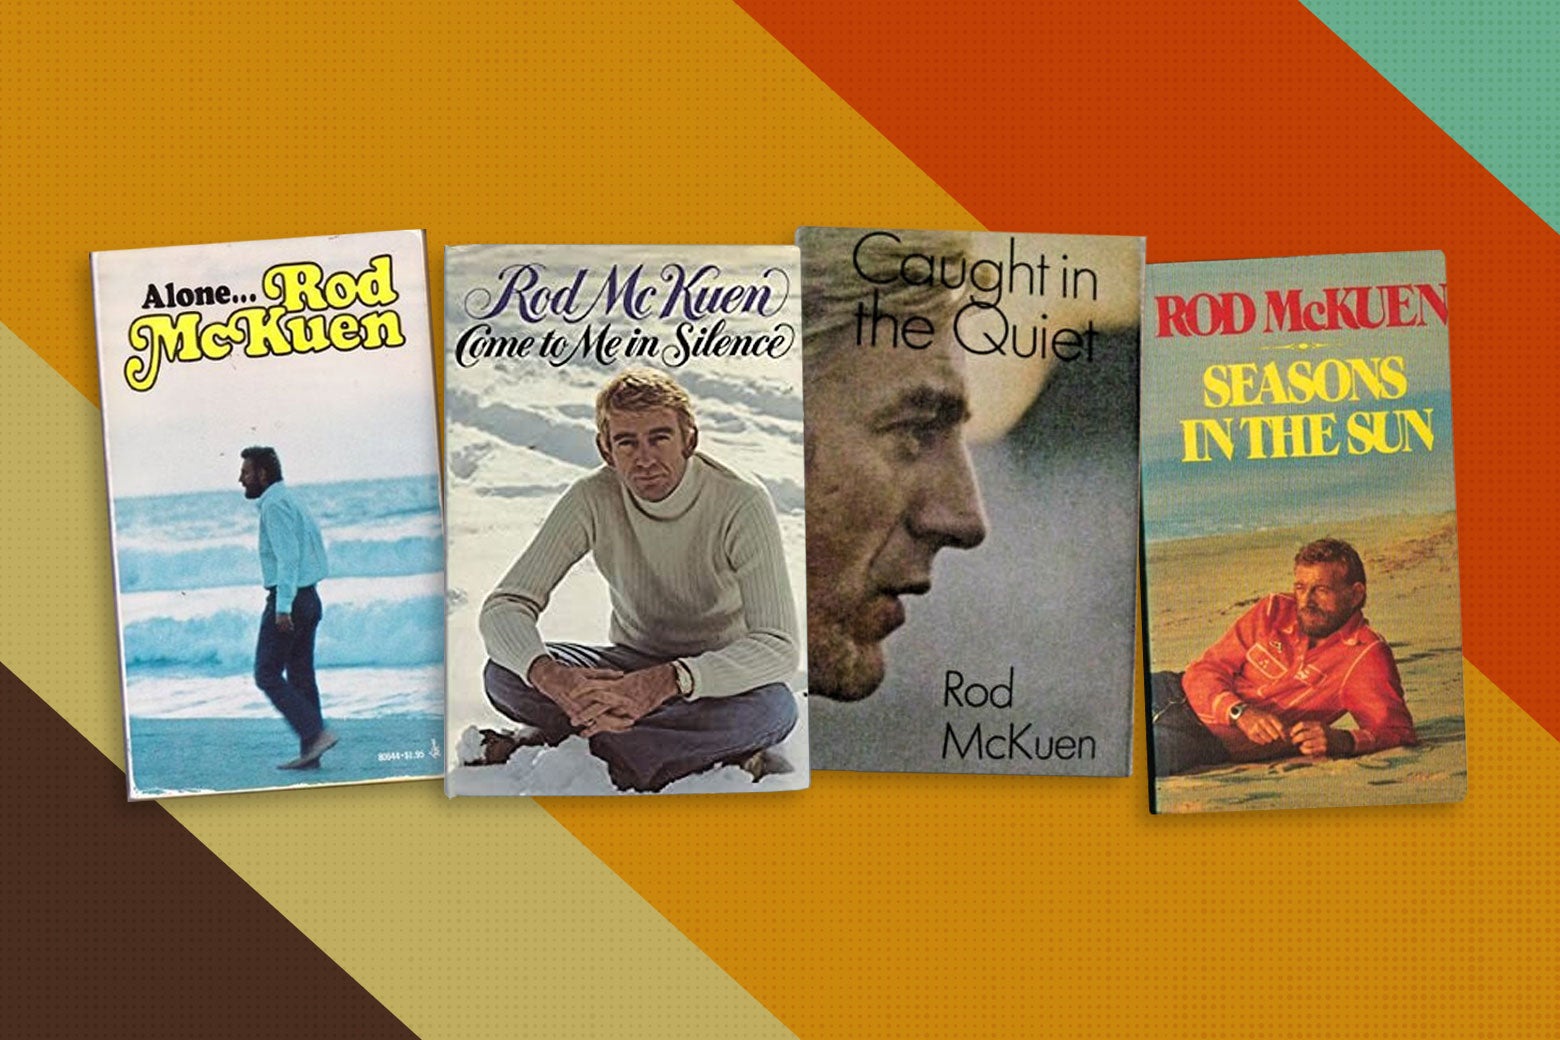 Rod McKuen's book covers for Alone…, Come to Me in Silence, Caught in the Quiet, and Seasons in the Sun, all featuring Rod in various handsome poses